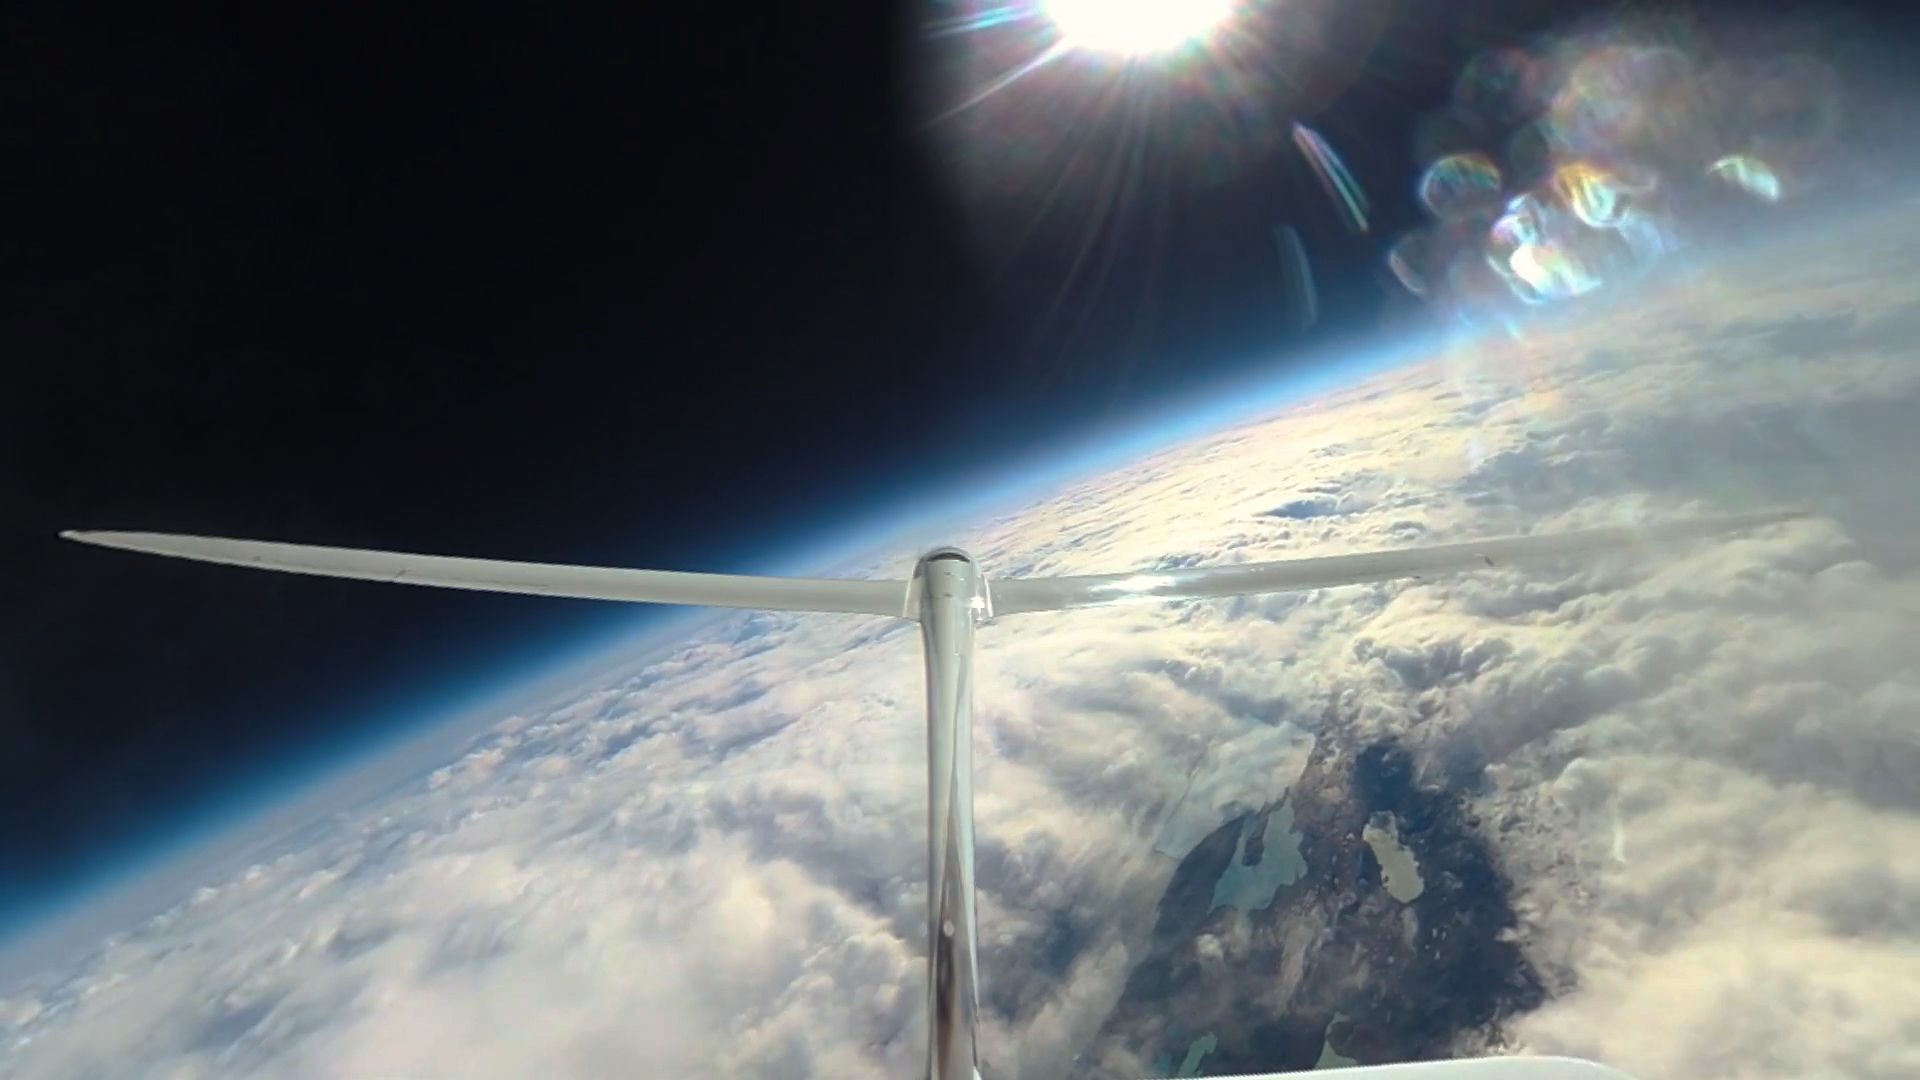 Airbus Perlan Mission II has set yet another new world altitude record for a glider, this time soaring the engineless Perlan 2 to 76,124 feet, in the process collecting vital data on flight performance, weather and the atmosphere. Click to enlarge.